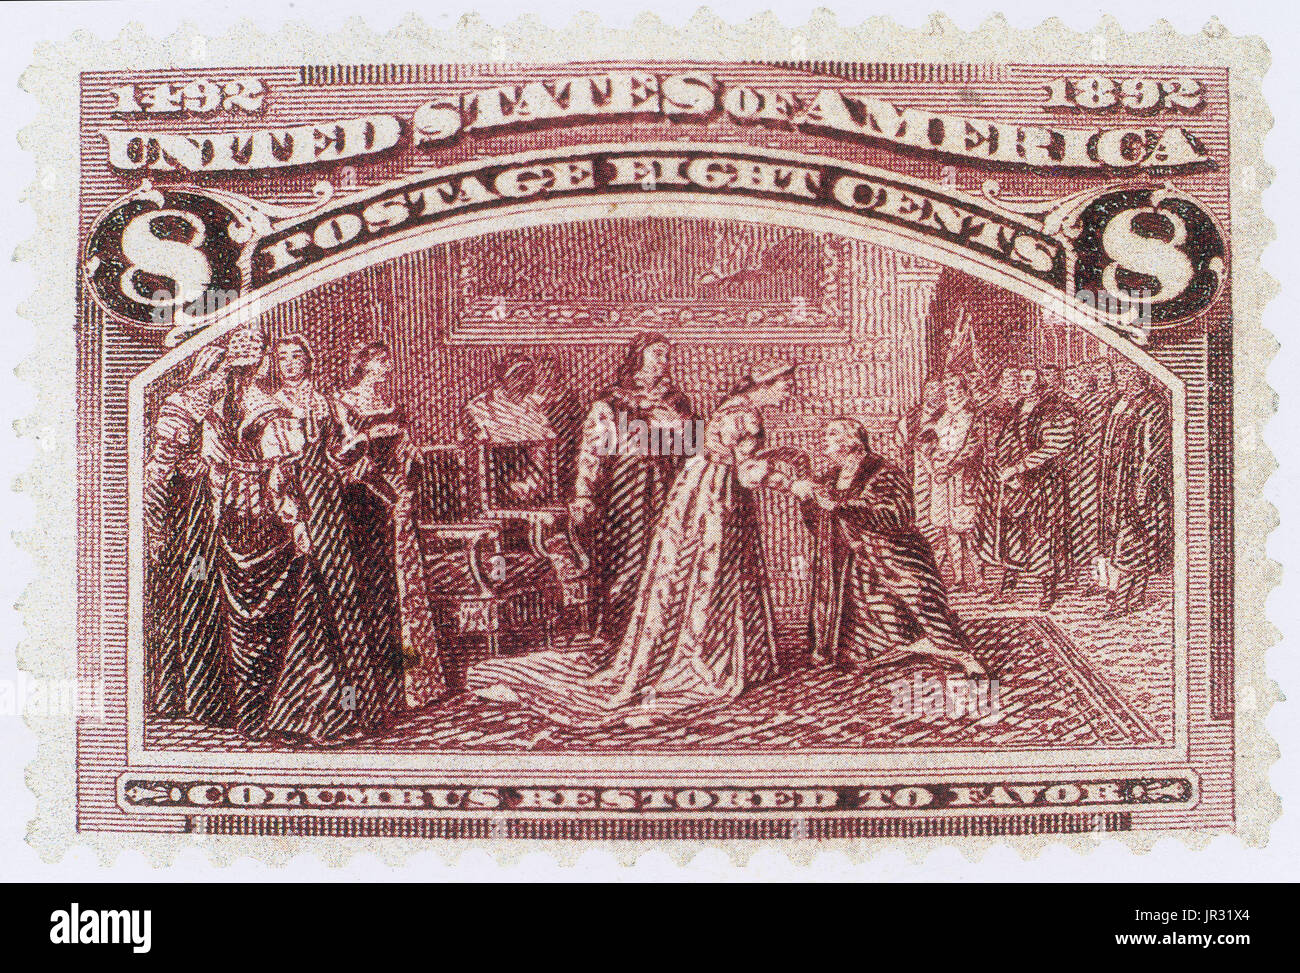 Columbus Restored to Favor,US Postage Stamp,1893 Stock Photo